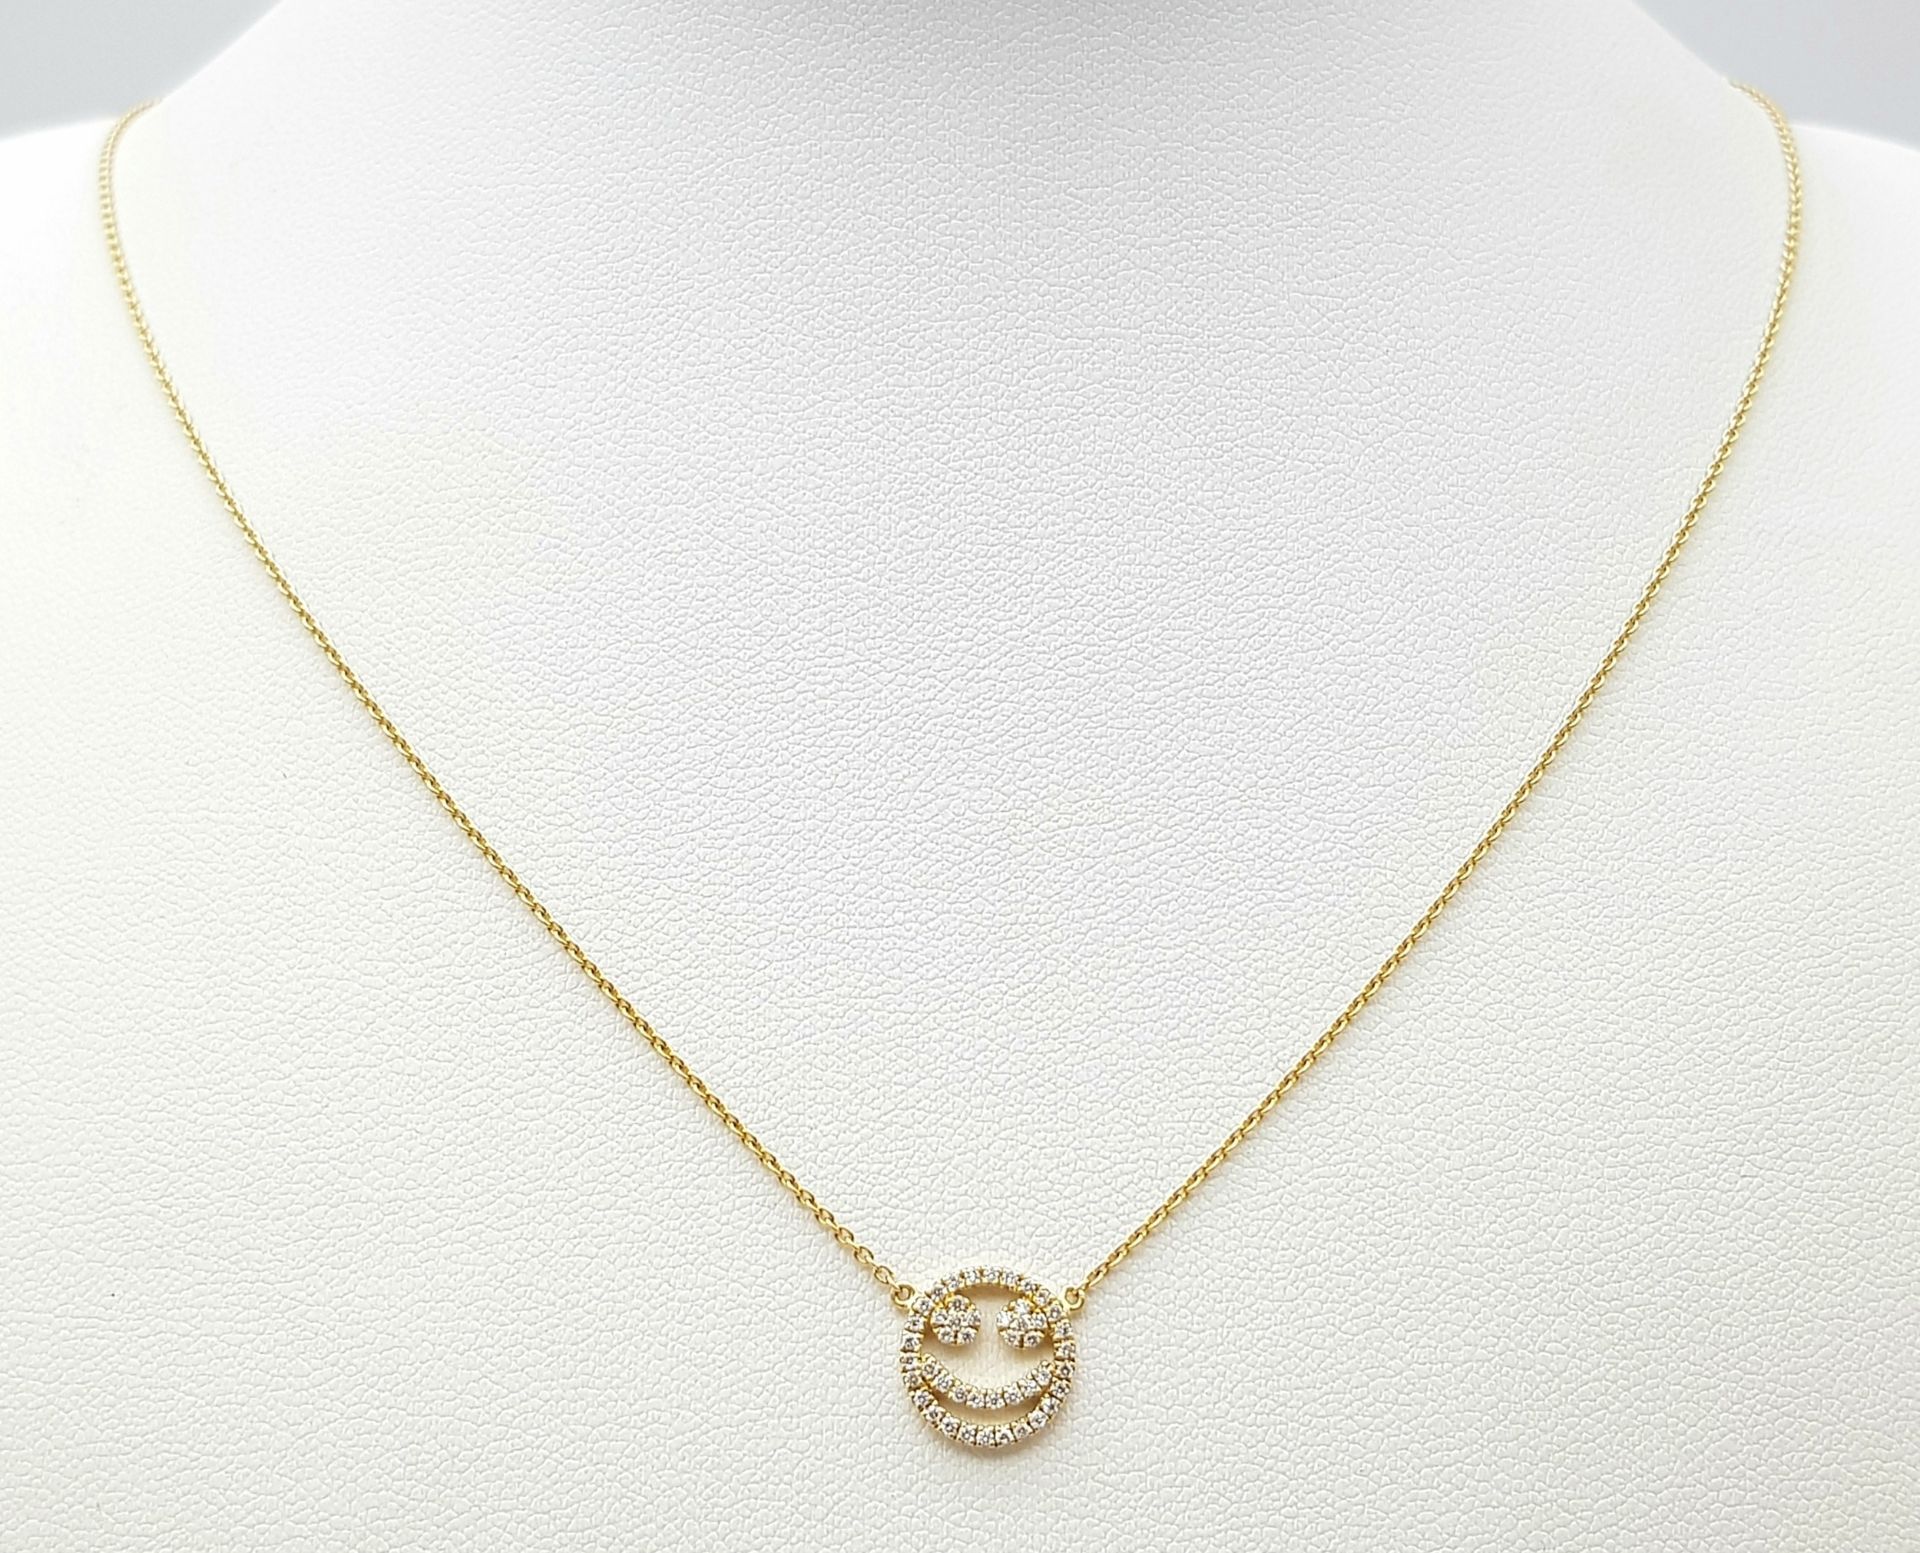 An 18K Gold Diamond Smiley Face Pendant on an 18K Yellow Gold Disappearing Necklace. 1cm diameter - Image 2 of 7